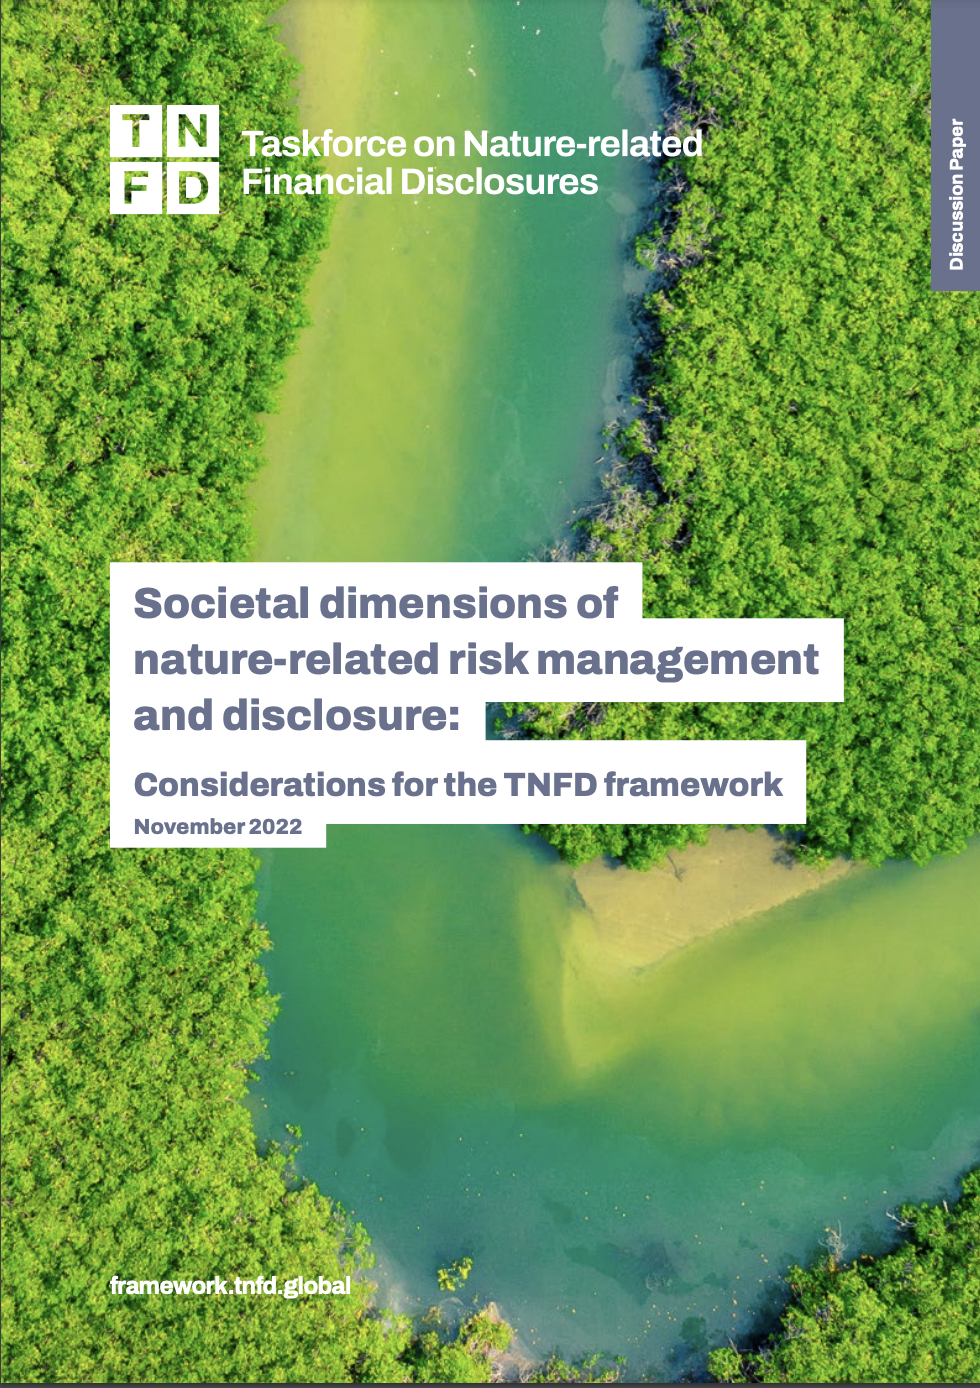 Societal dimensions of nature-related risk management and disclosure: Considerations for the TNFD framework